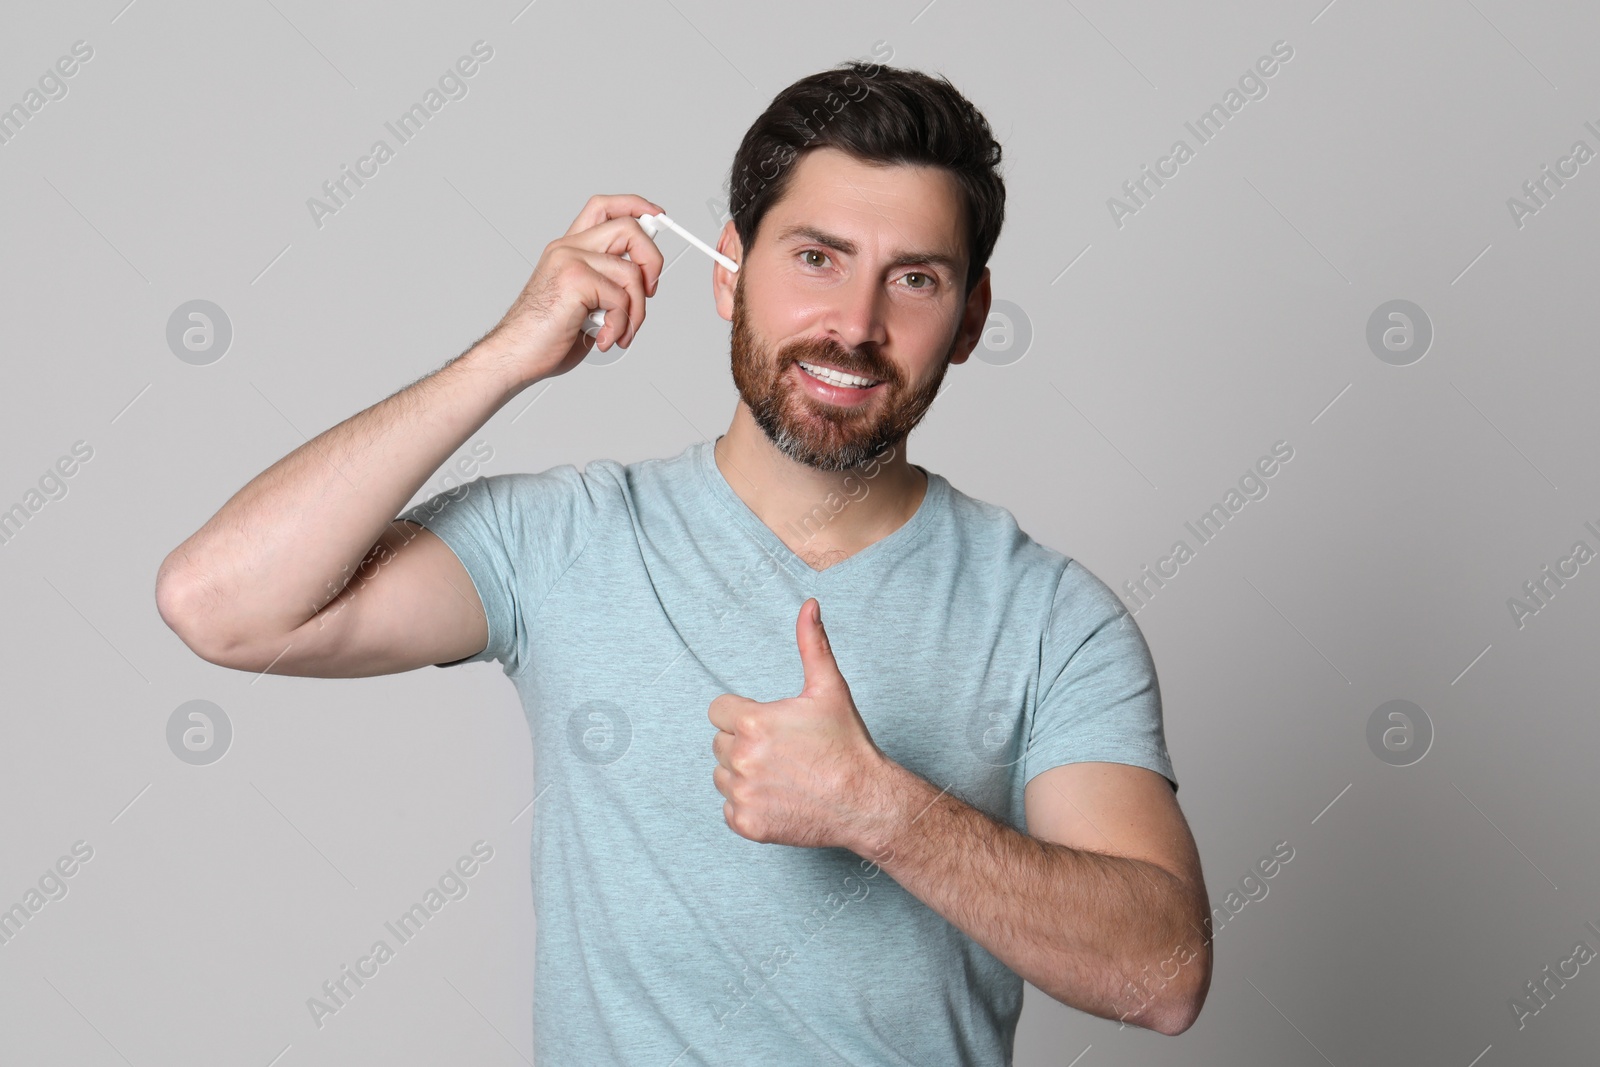 Photo of Man using ear spray and showing thumbs up on grey background